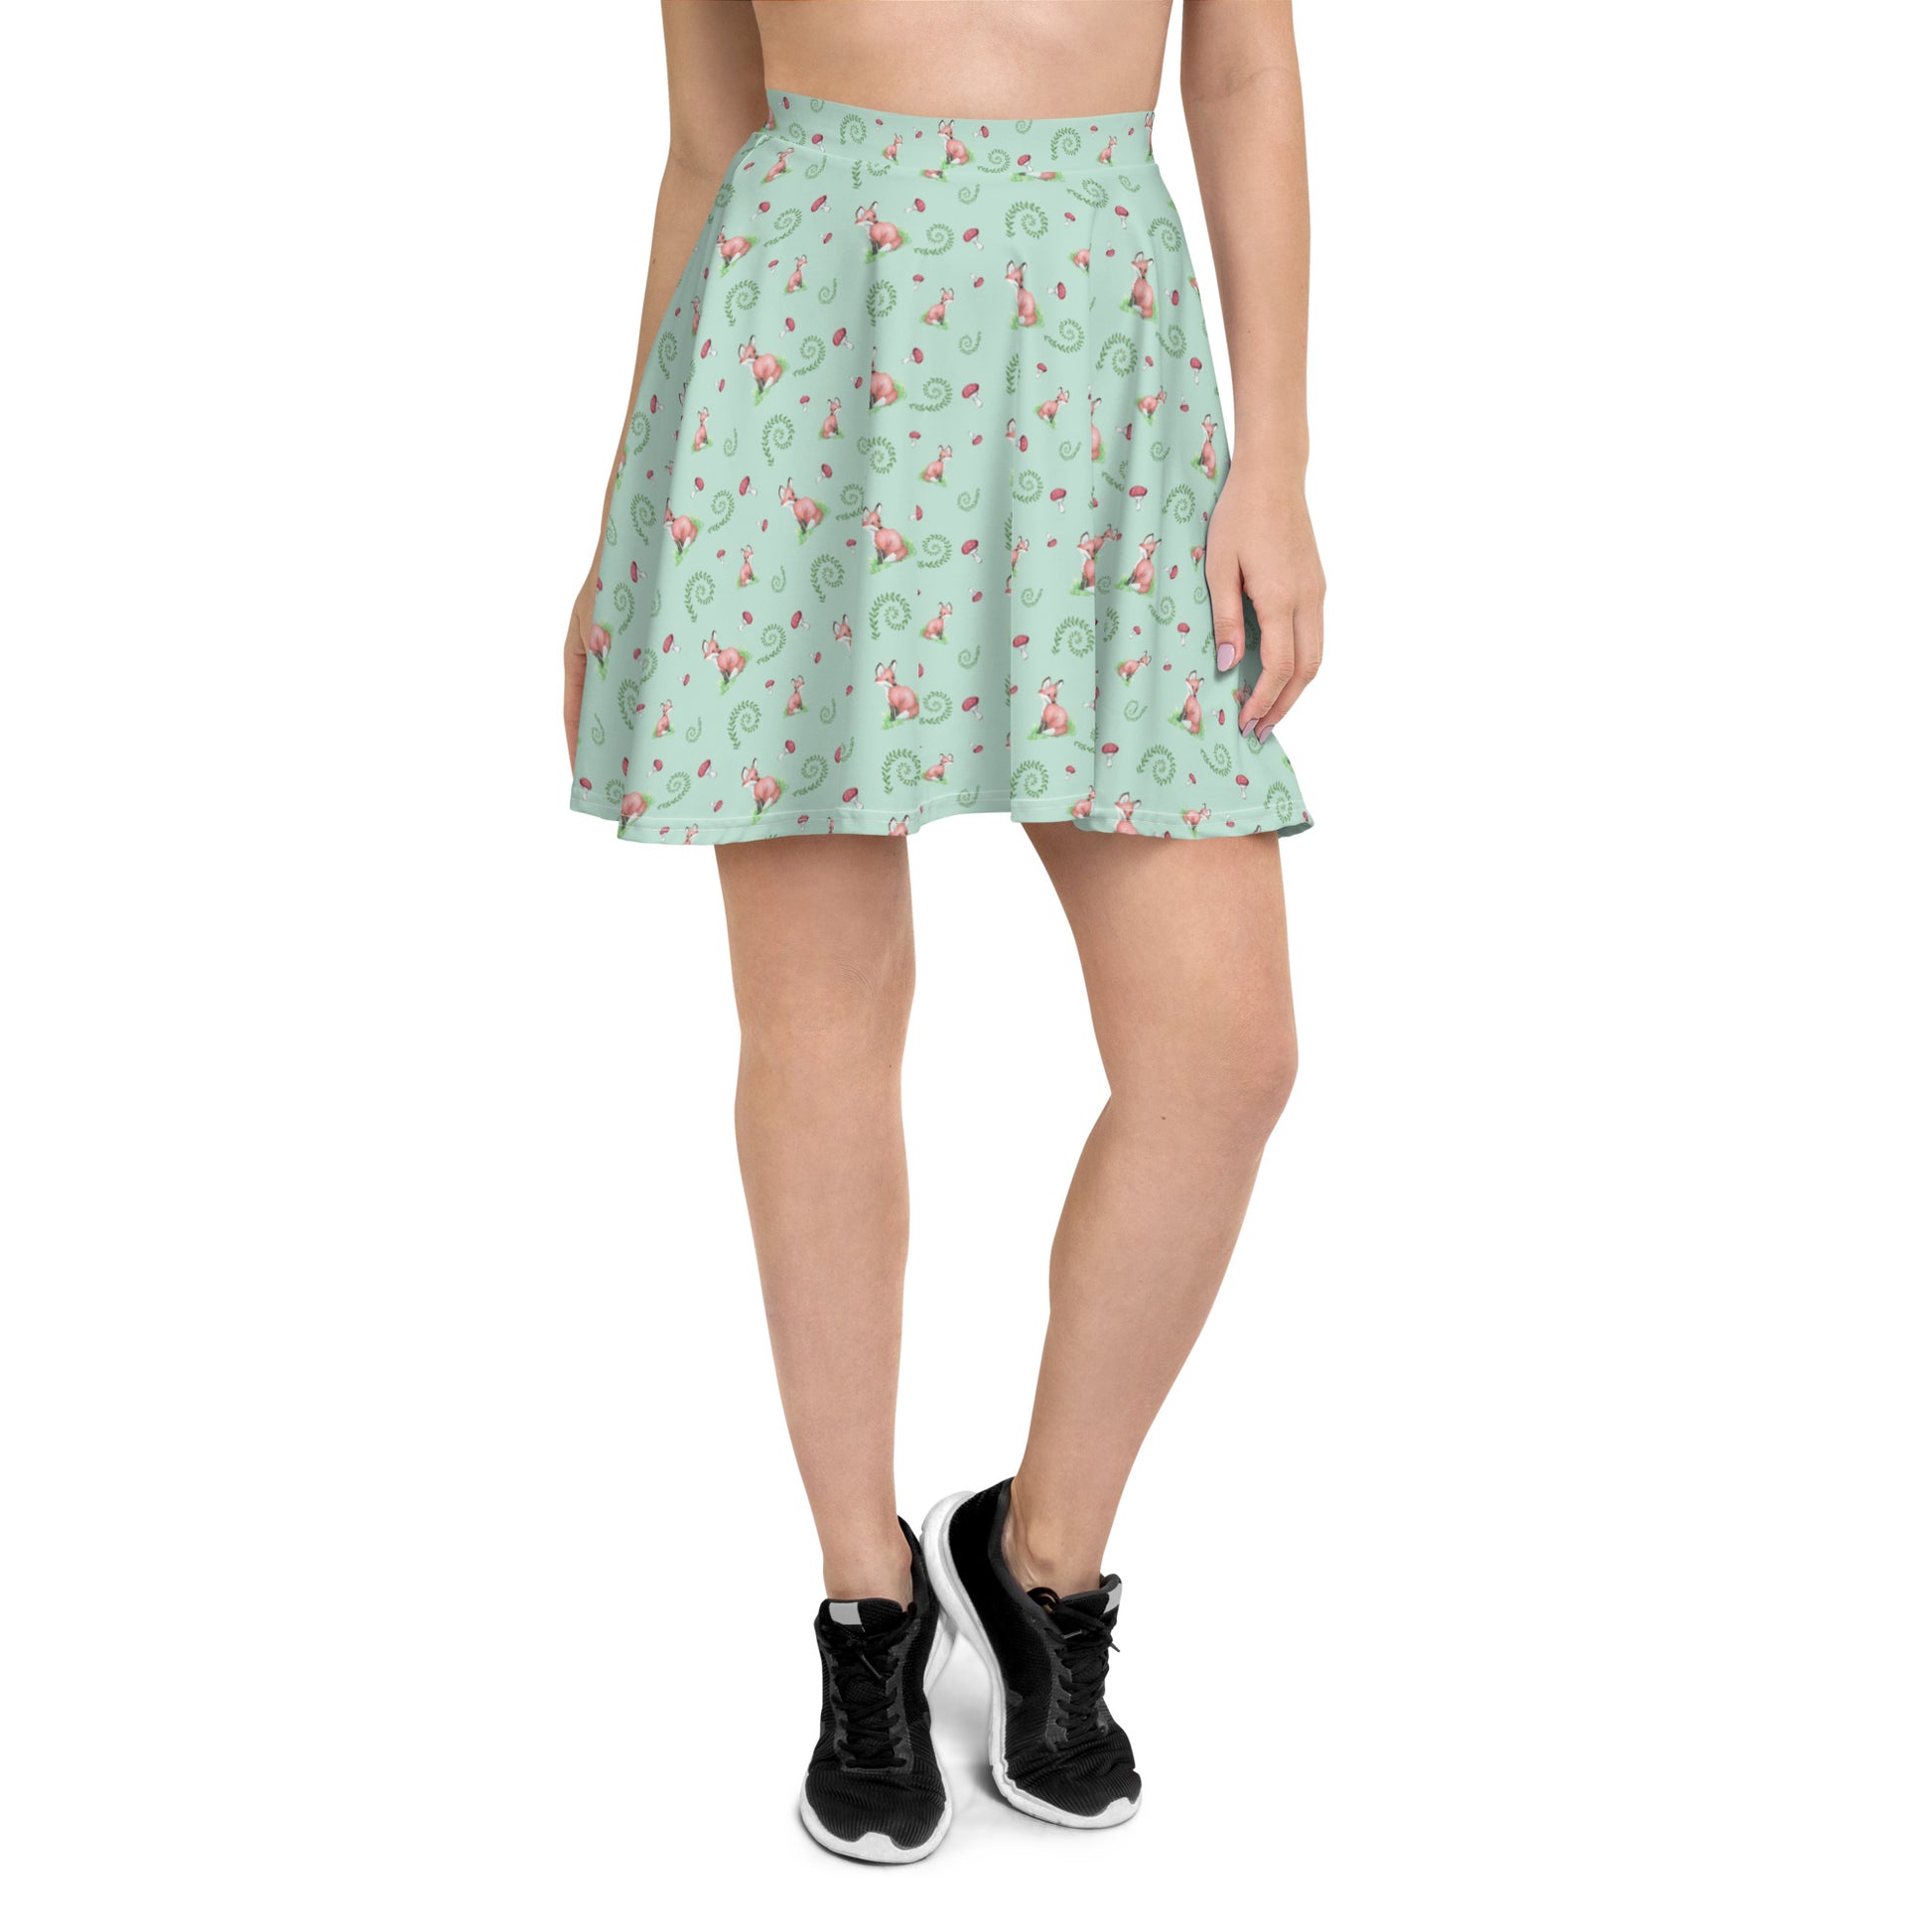 Forest Fox patterned skater skirt with mushrooms and ferns. Flared cut, mid-thigh length with elastic waist. Shown on female model with black shoes.